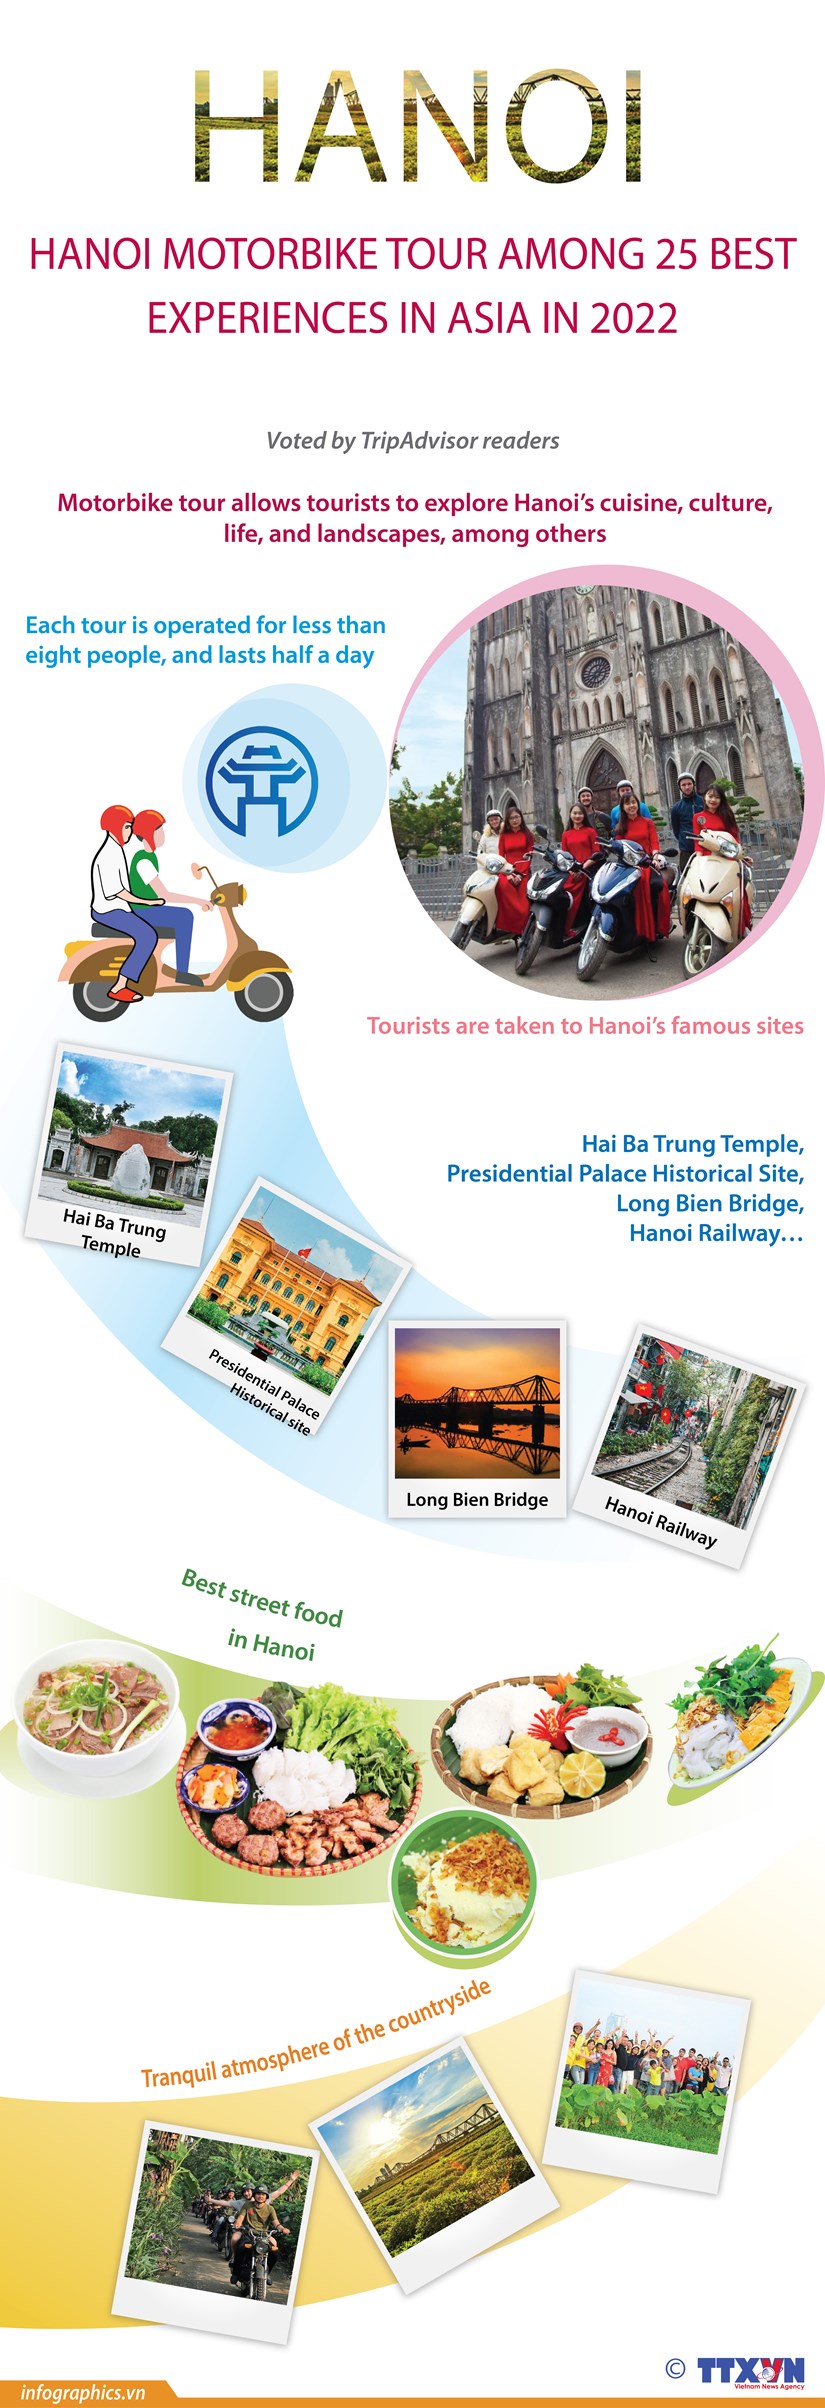 Hanoi motorbike tour among 25 best experiences in Asia in 2022 hinh anh 1